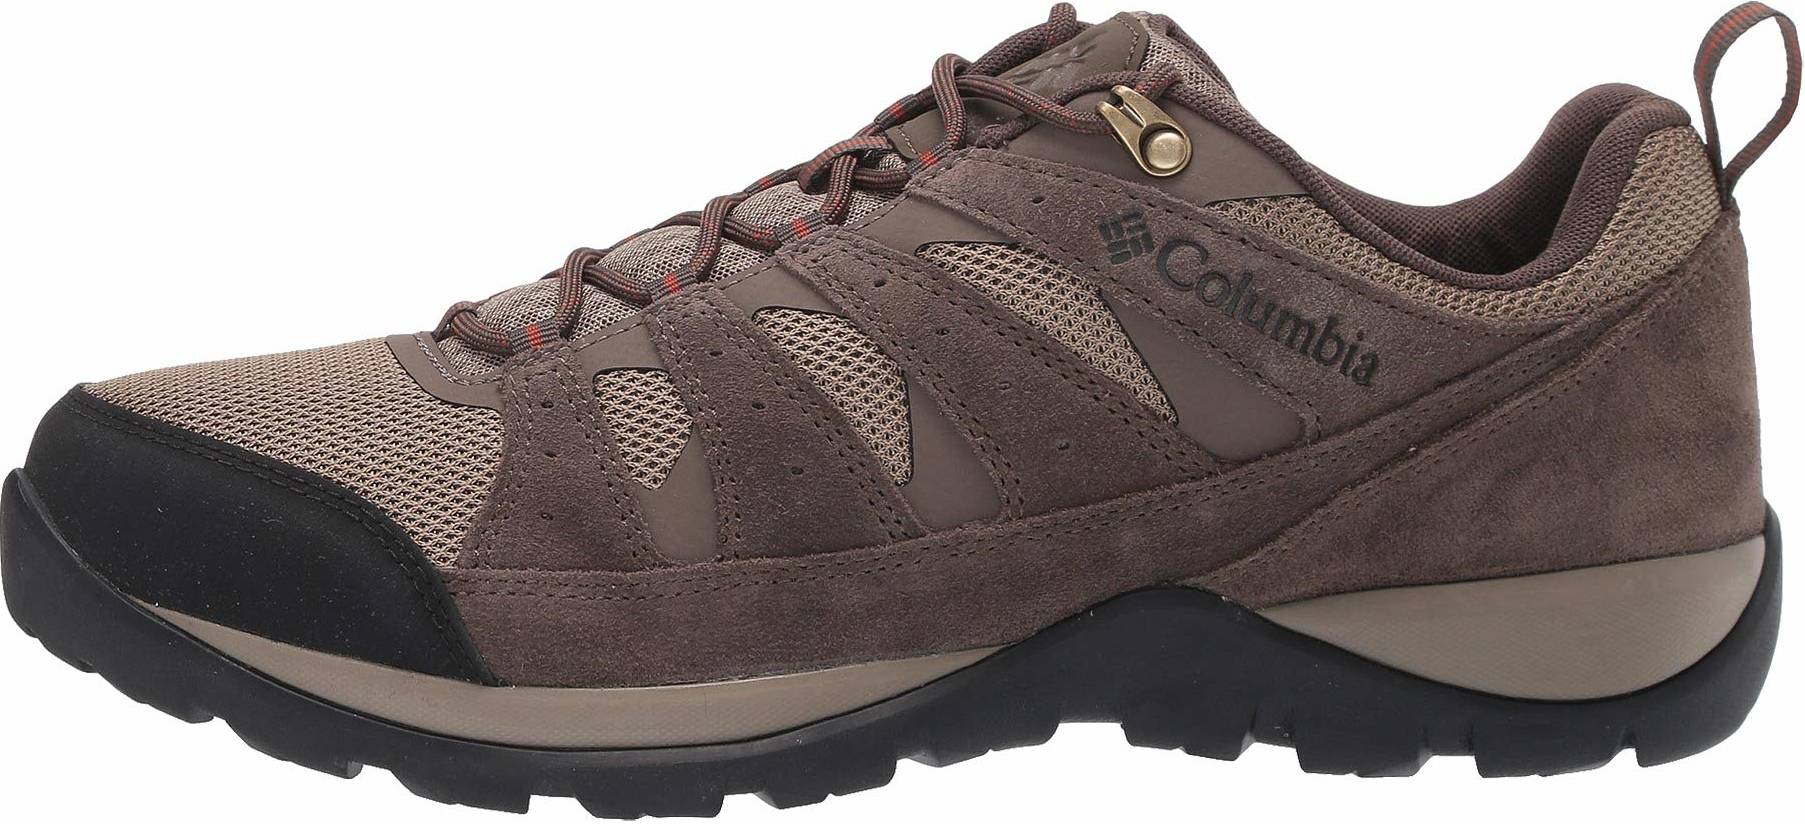 extra wide mens hiking shoes